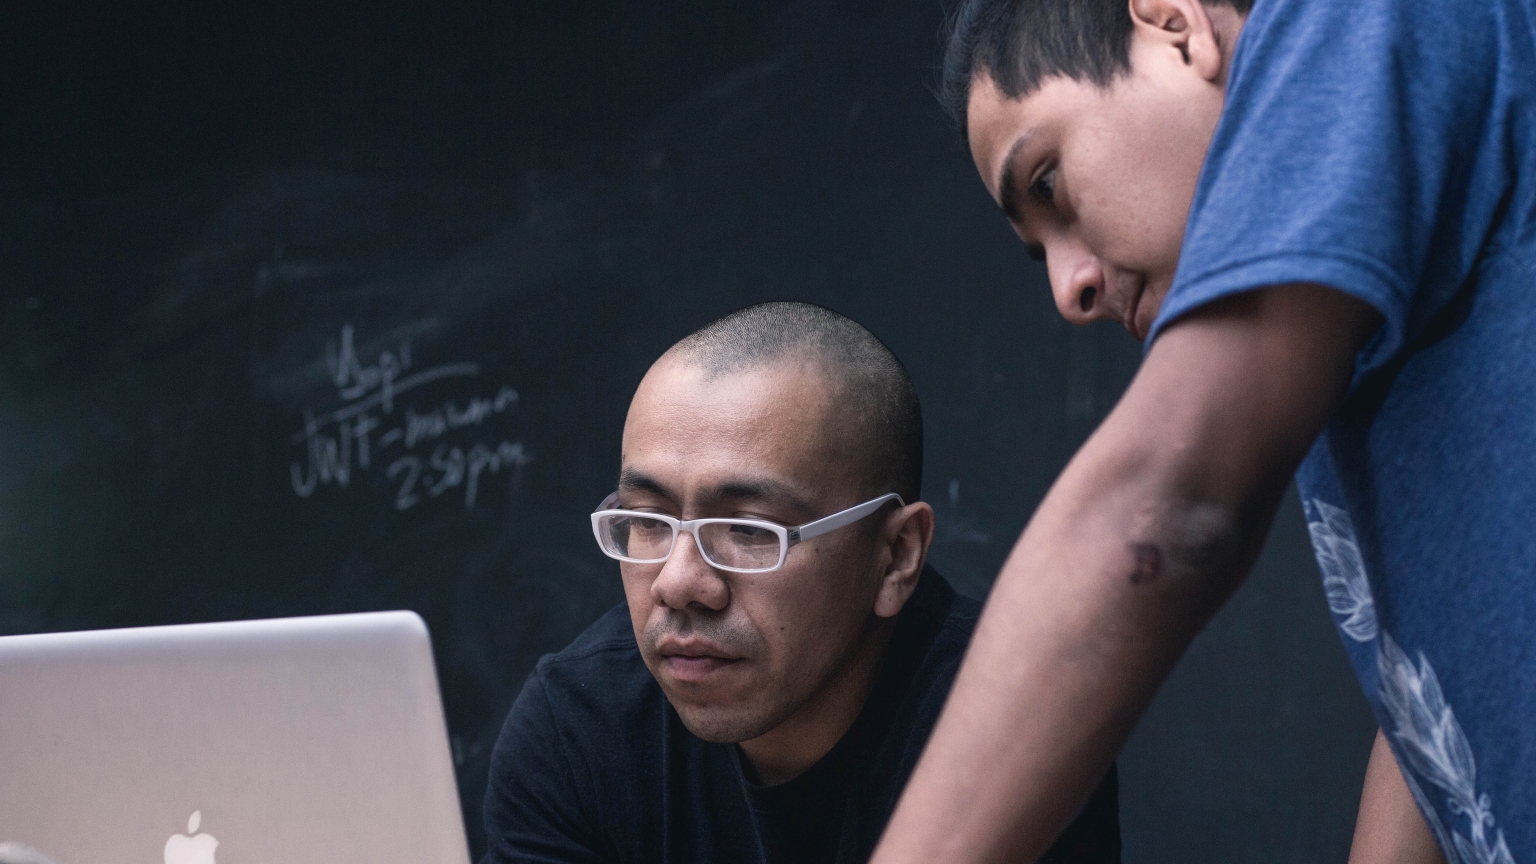 Two men look at a laptop in front of a blackboard.